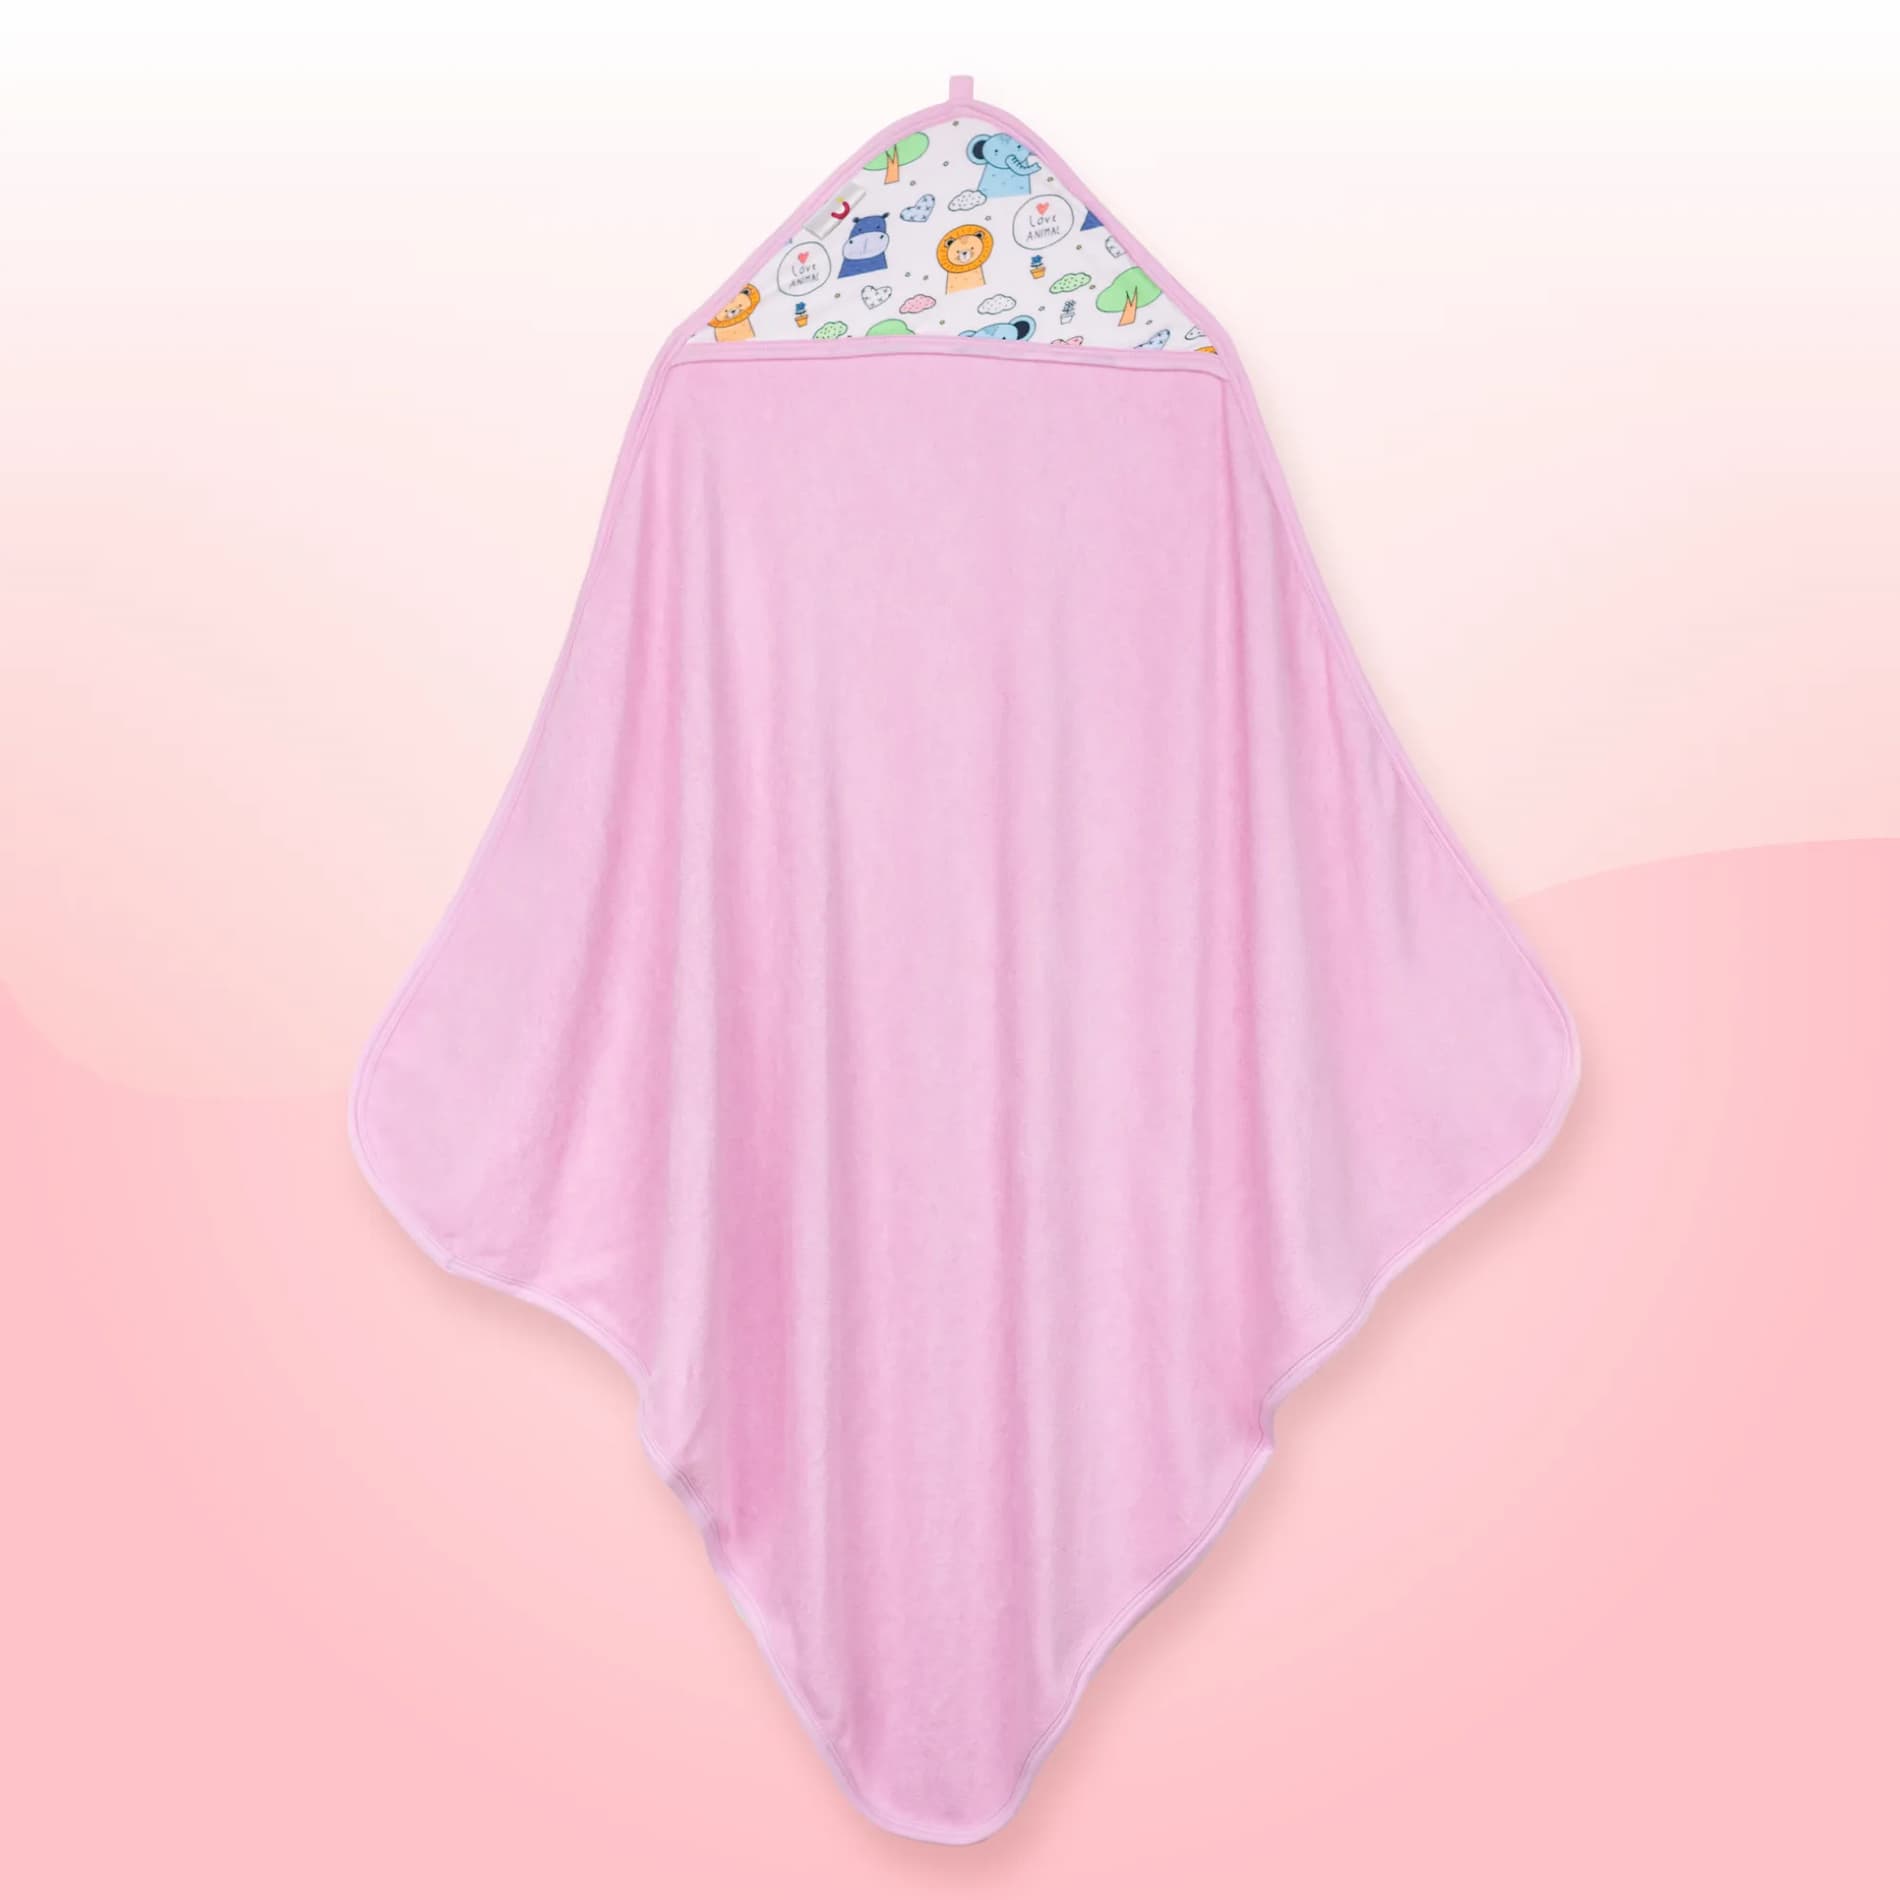 Baby Hooded Towel | Soft, Lightweight & Extra Absorbent |Keeps Baby Snug | Dries 3x Faster than Cotton | Baby Safari - Lavender (78 cm x 78cm)